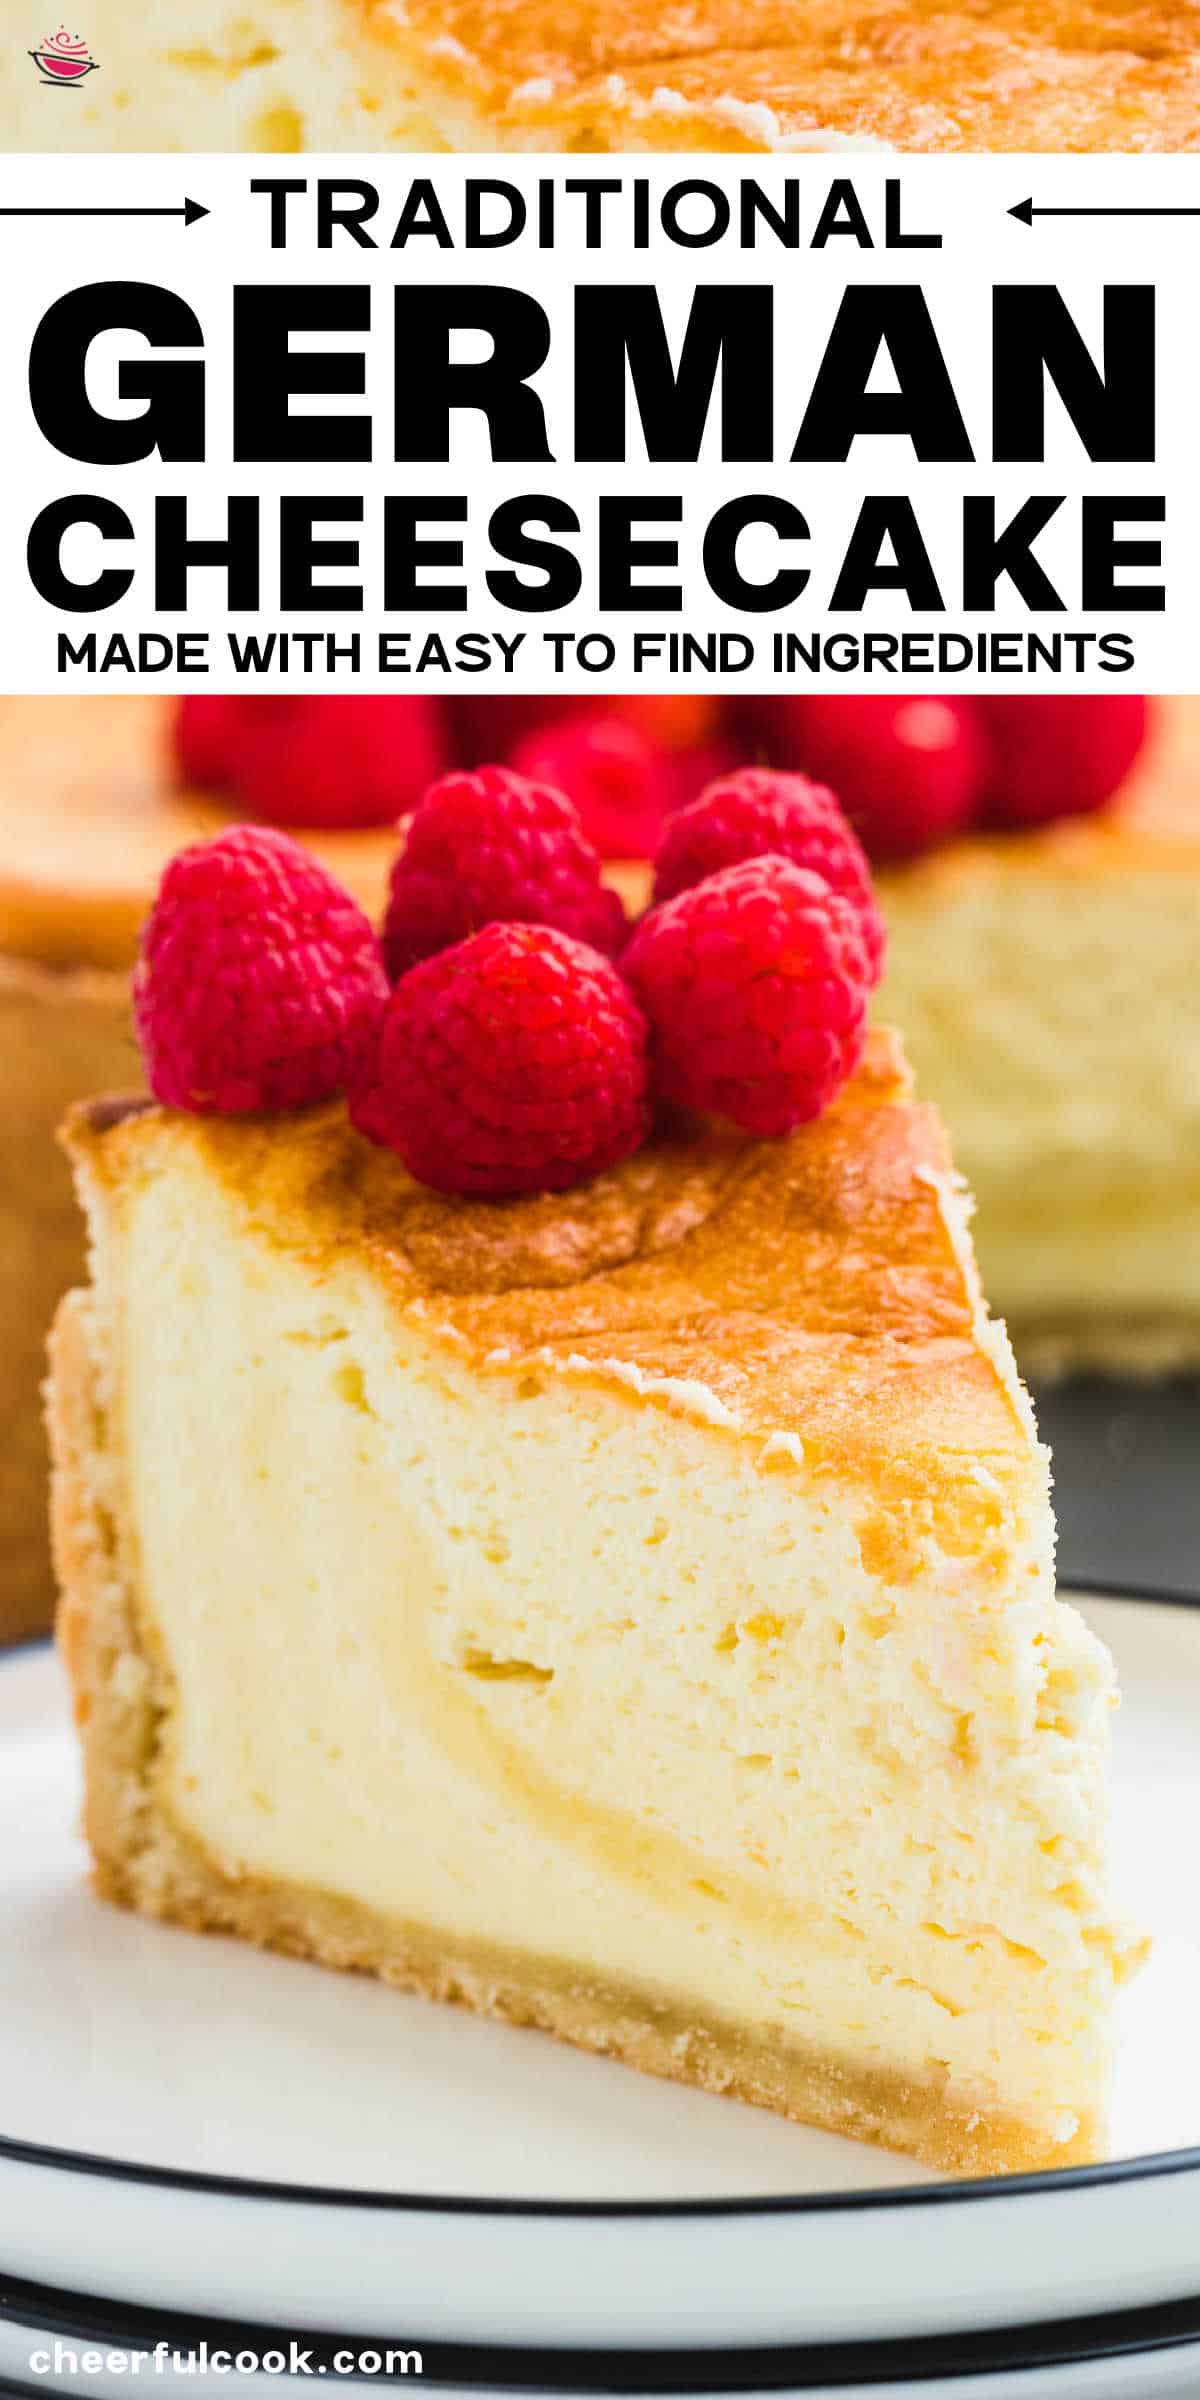 This traditional homemade German Cheesecake is made with a deliciously rich and creamy filling and baked to perfection in a buttery pastry crust. #cheerfulcook #germancheesecake #cheesecakerecipe #homemade #dessert #recipe #käsekuchen #withoutquark ♡ cheerfulcook.com via @cheerfulcook